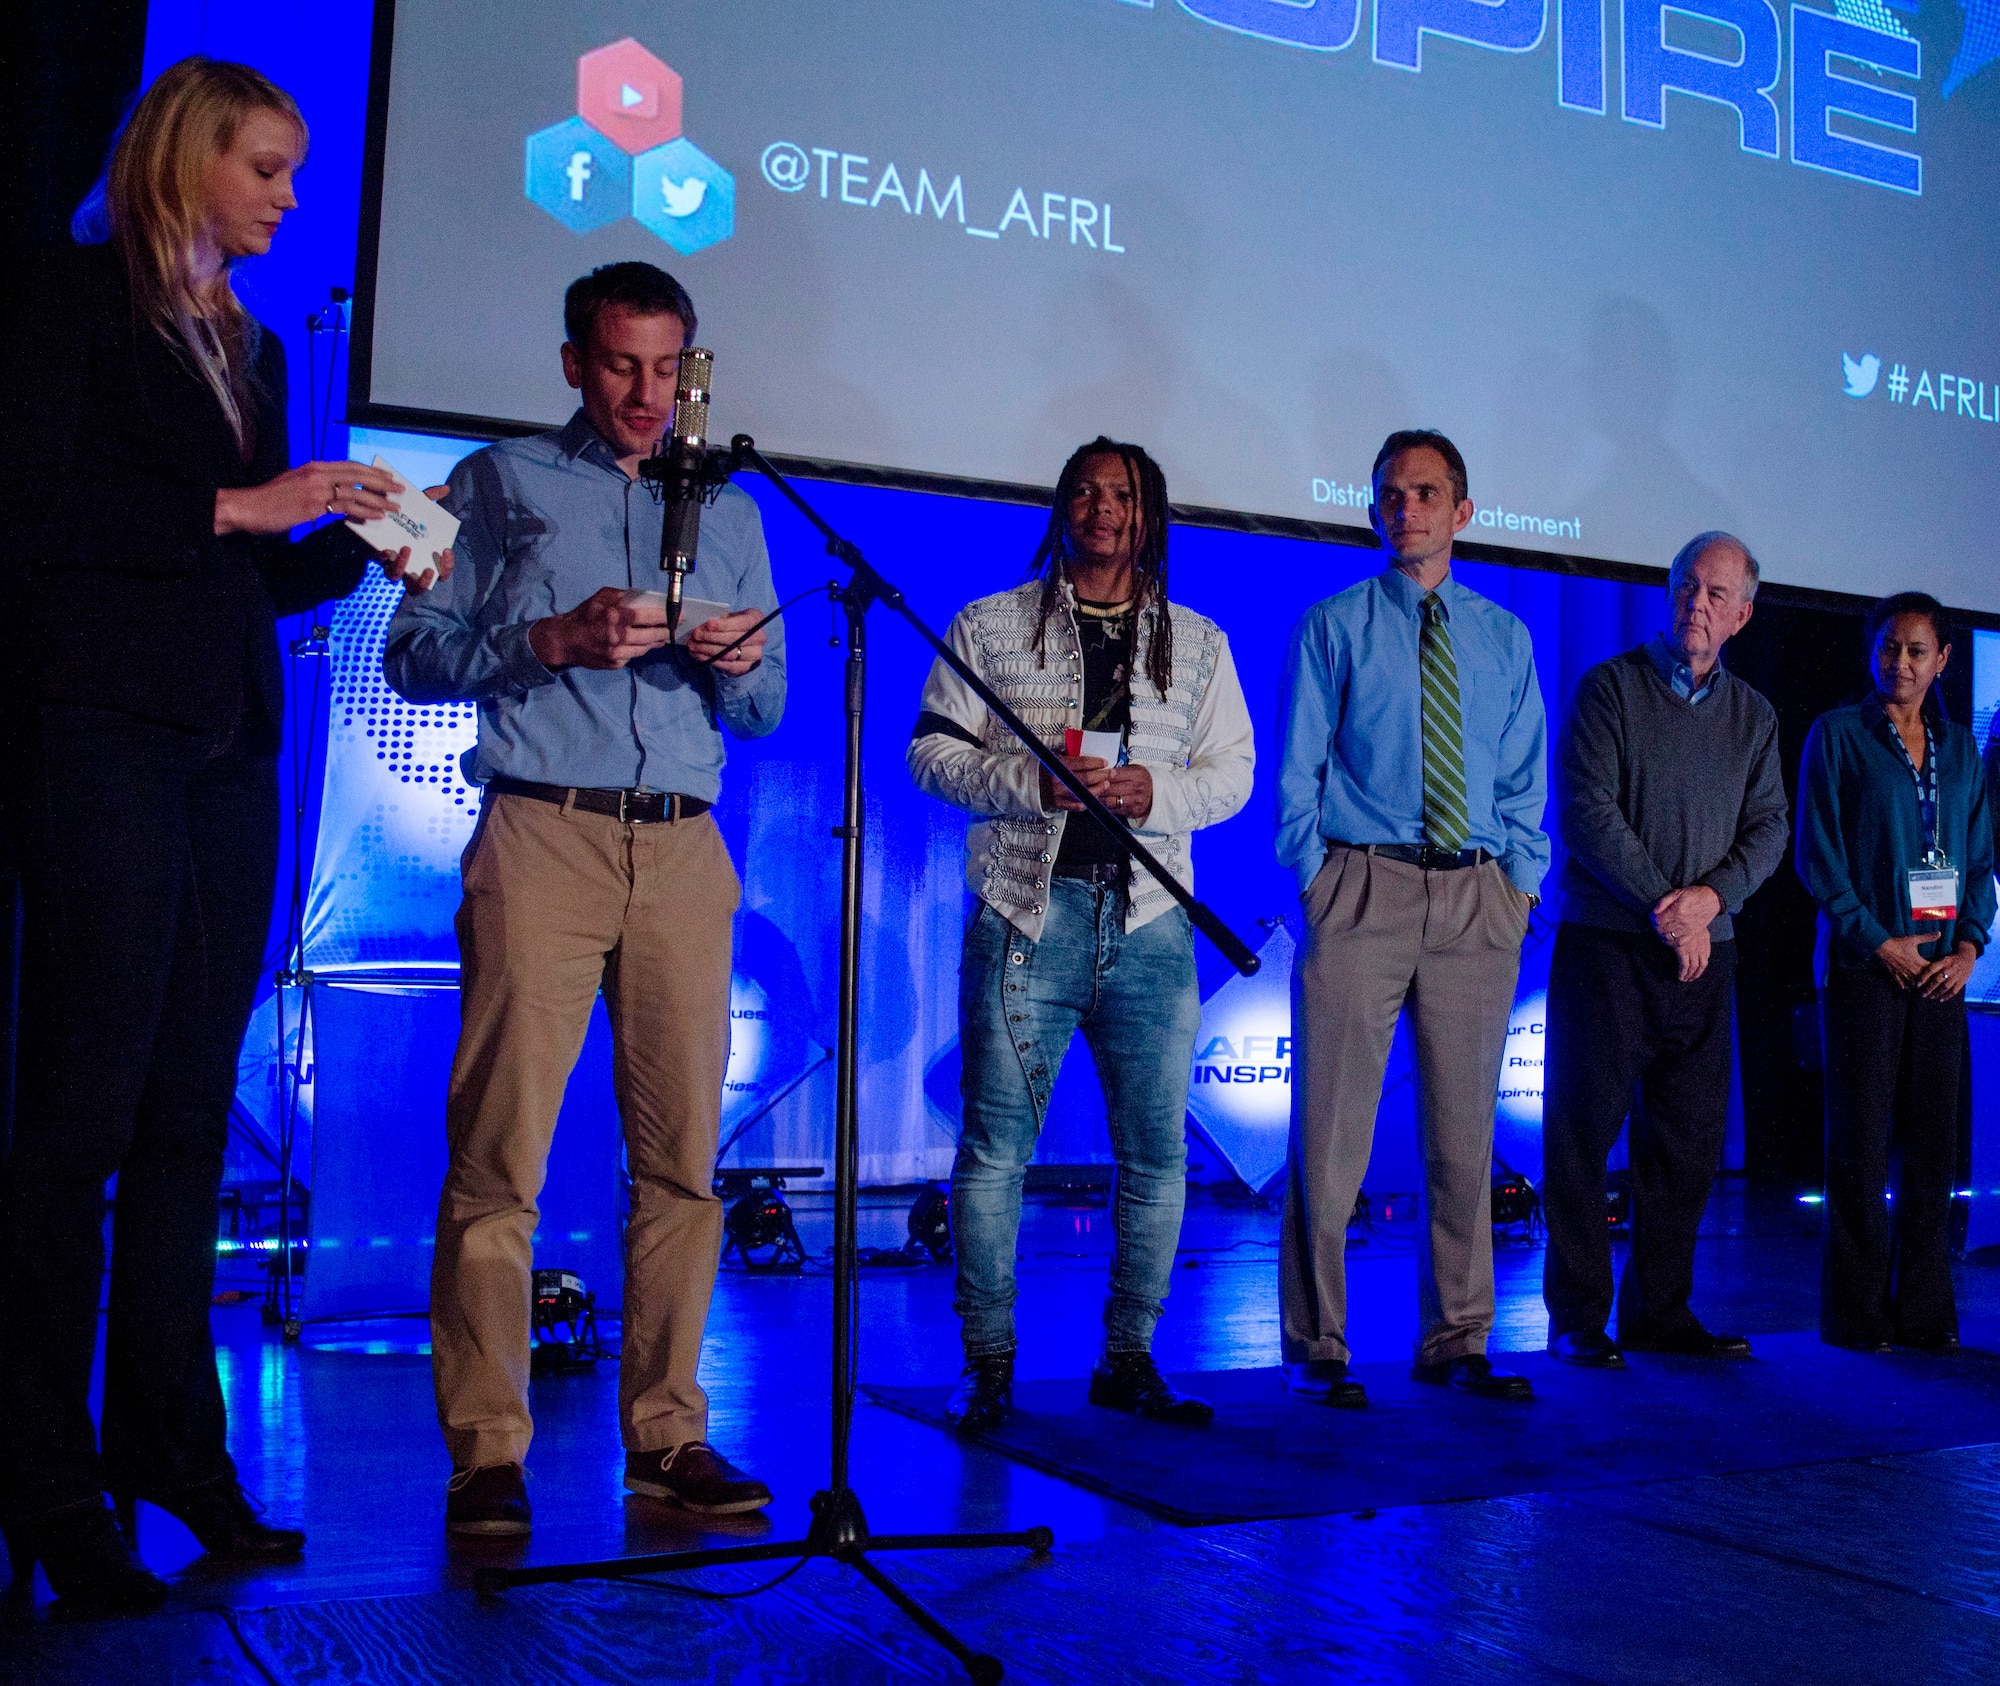 Kerianne Gross and Dr. Dan Berrigan (left), architects of AFRL Inspire, served as the event’s emcees.  Also pictured are four presenters from the inaugural AFRL Inspire event. From left: Dr. Moriba Jah, Dr. Jeff Calcaterra, Dr. Robert Fugate, and Dr. Nandini Iyer. (U.S. Air Force photo / Mikee Huber)